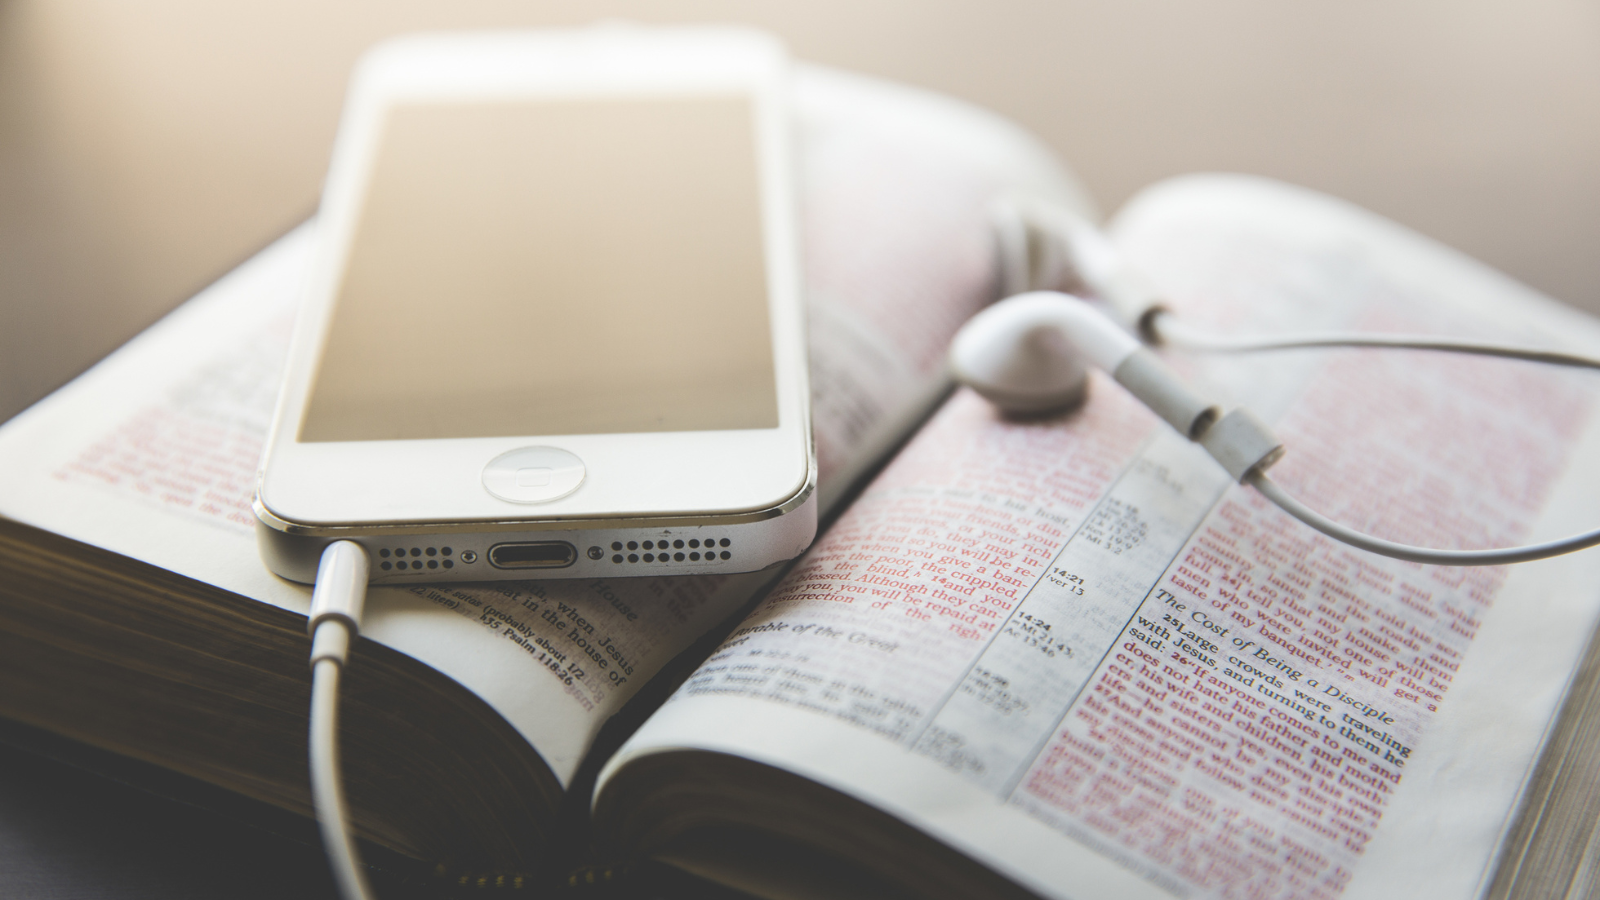 An iphone with earbuds on top of an open bible.